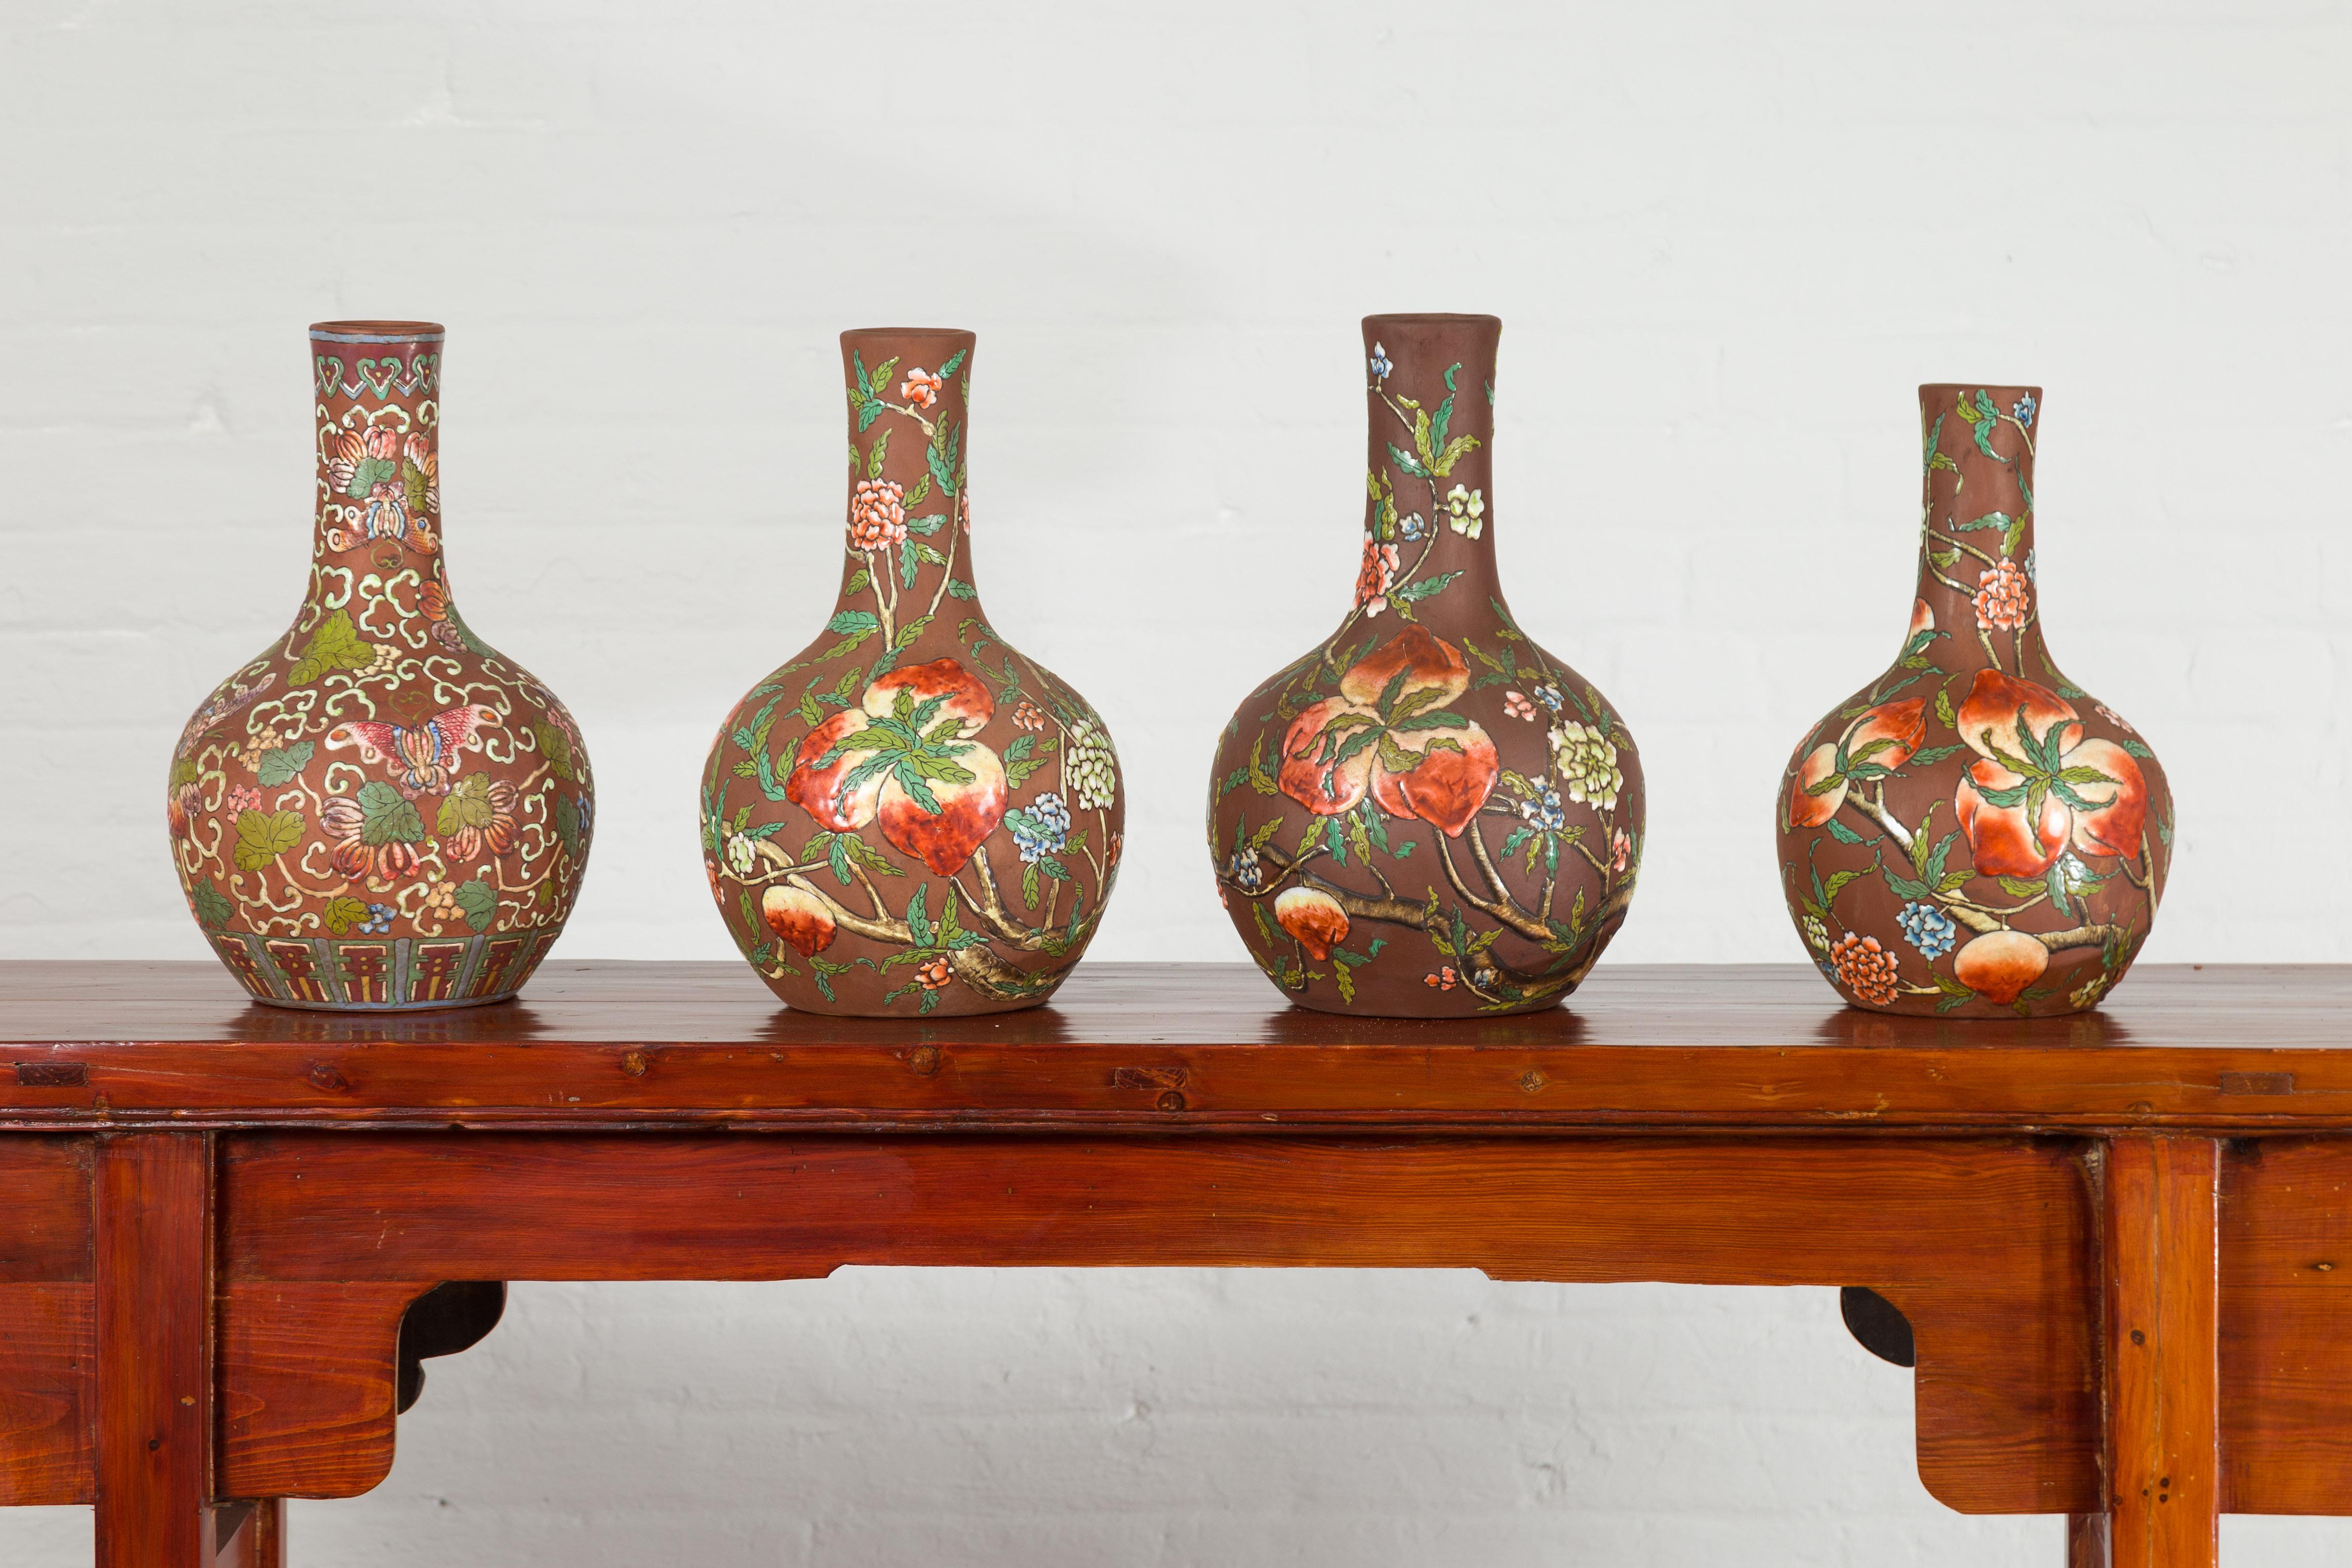 A set of four Chinese vintage Kendi shape handmade vessels from the mid-20th century, with raised fruit and flower motifs. We currently have four available, priced and sold each $750. Created in China during the mid-century period, these Kendi